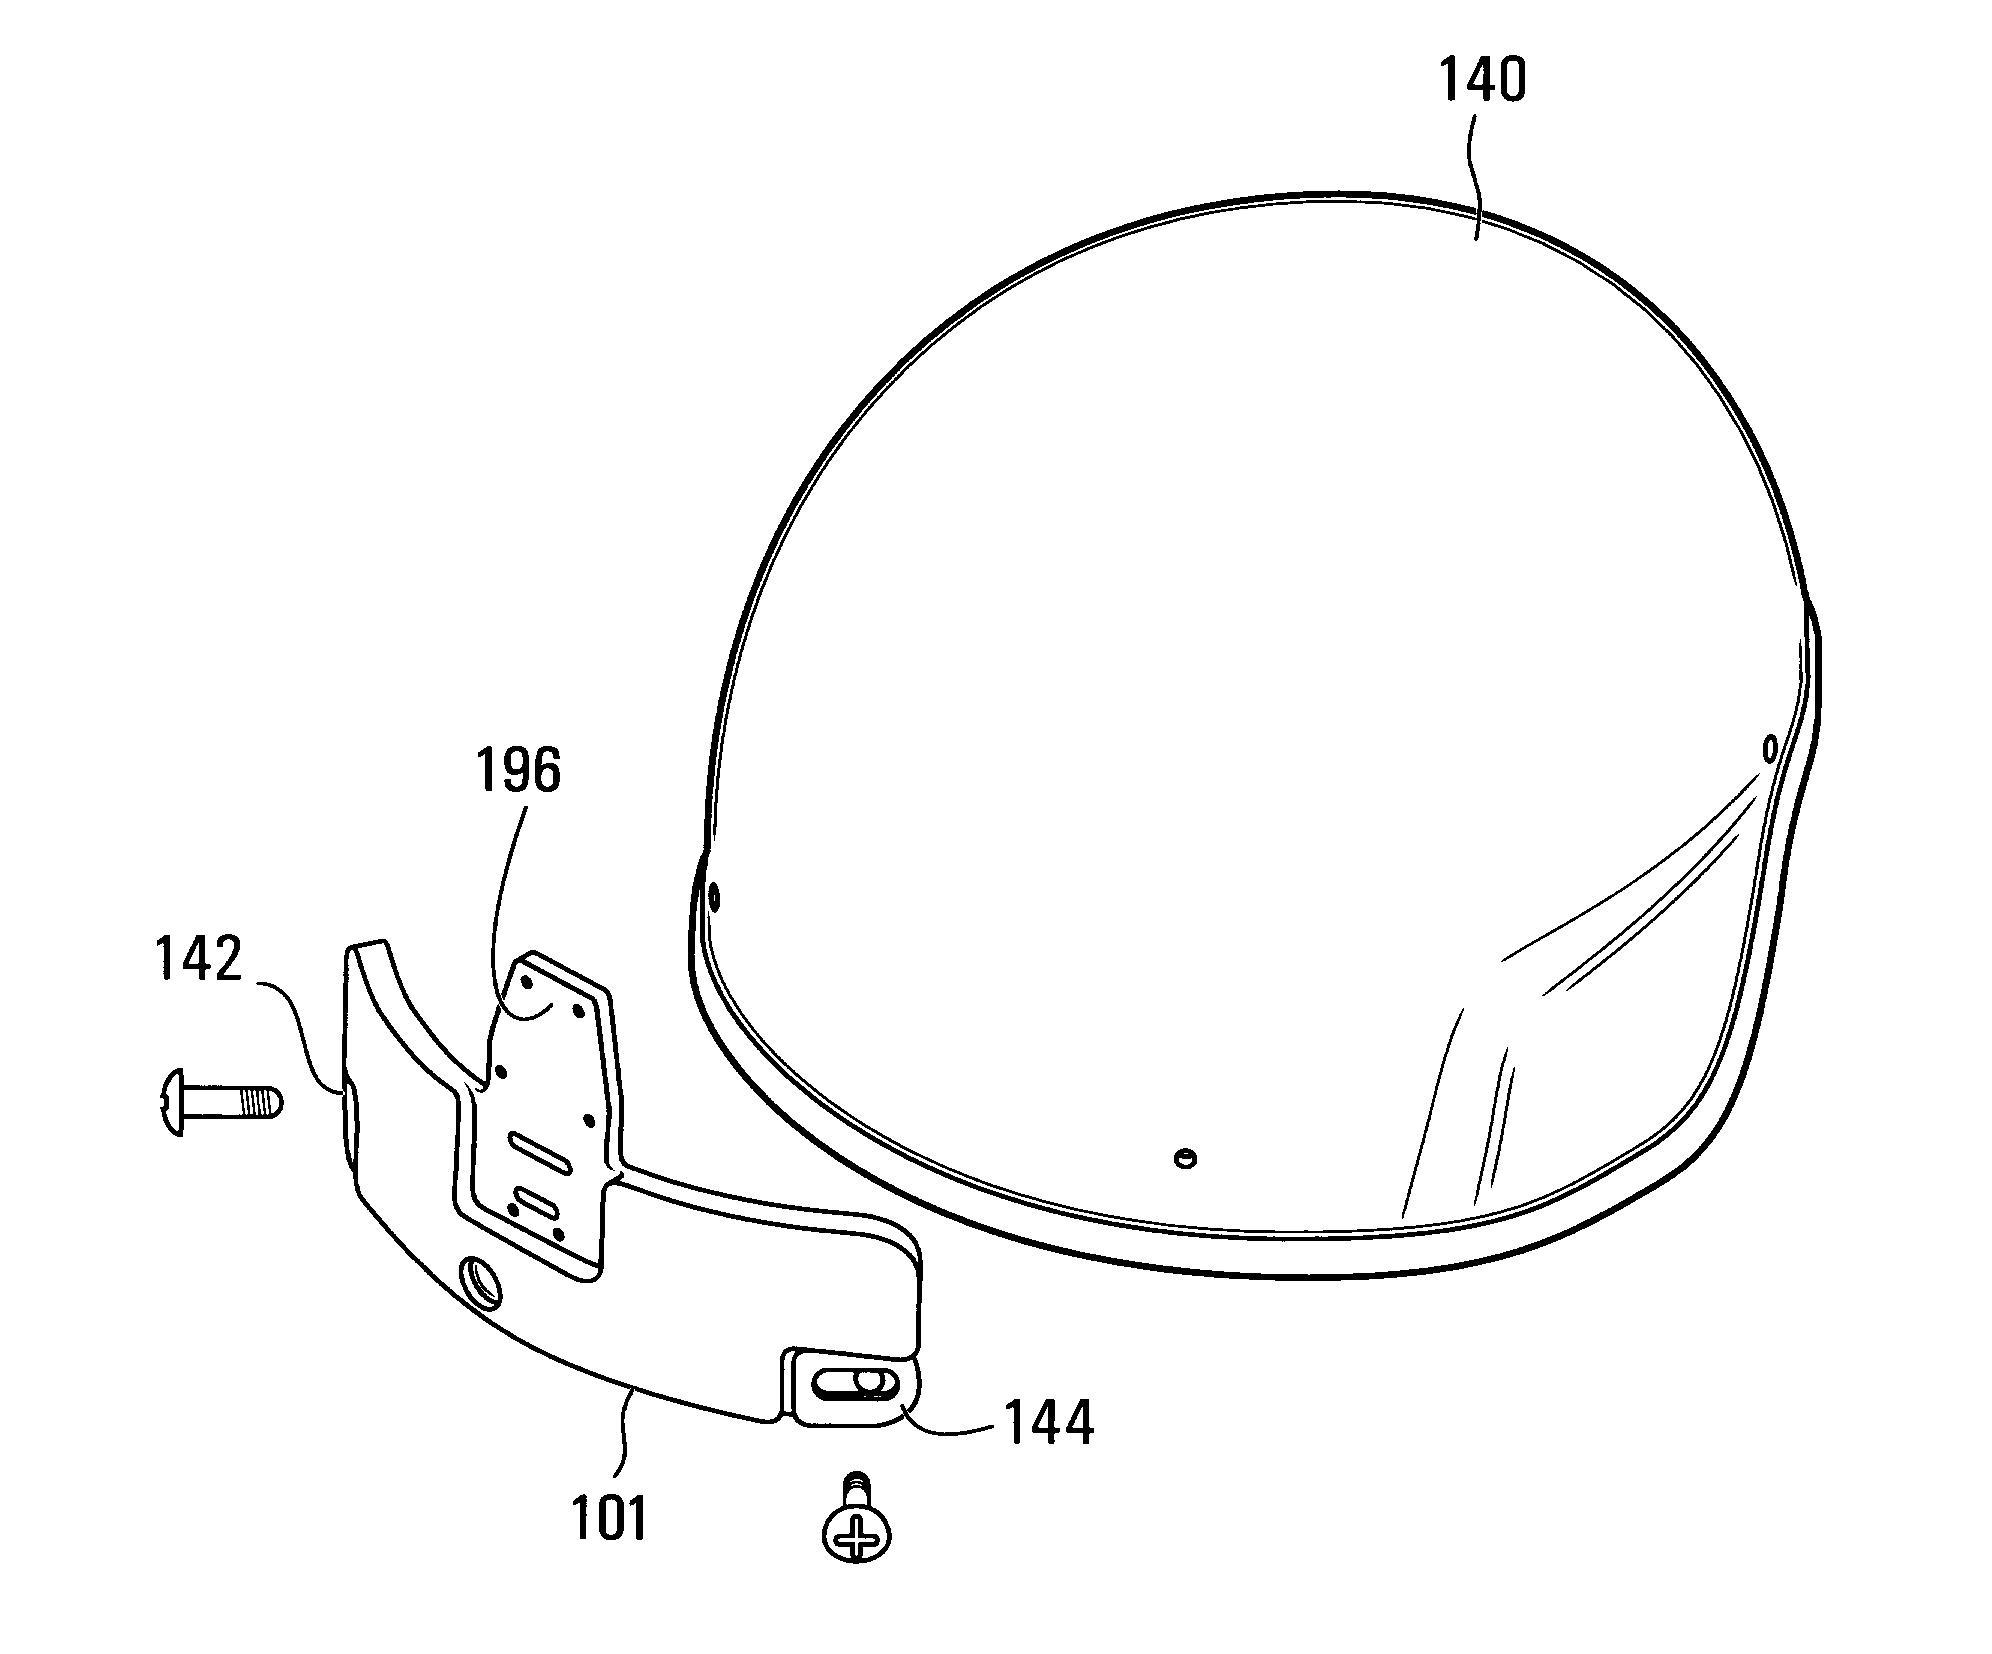 Apparatus and method for measuring and recording data from violent events